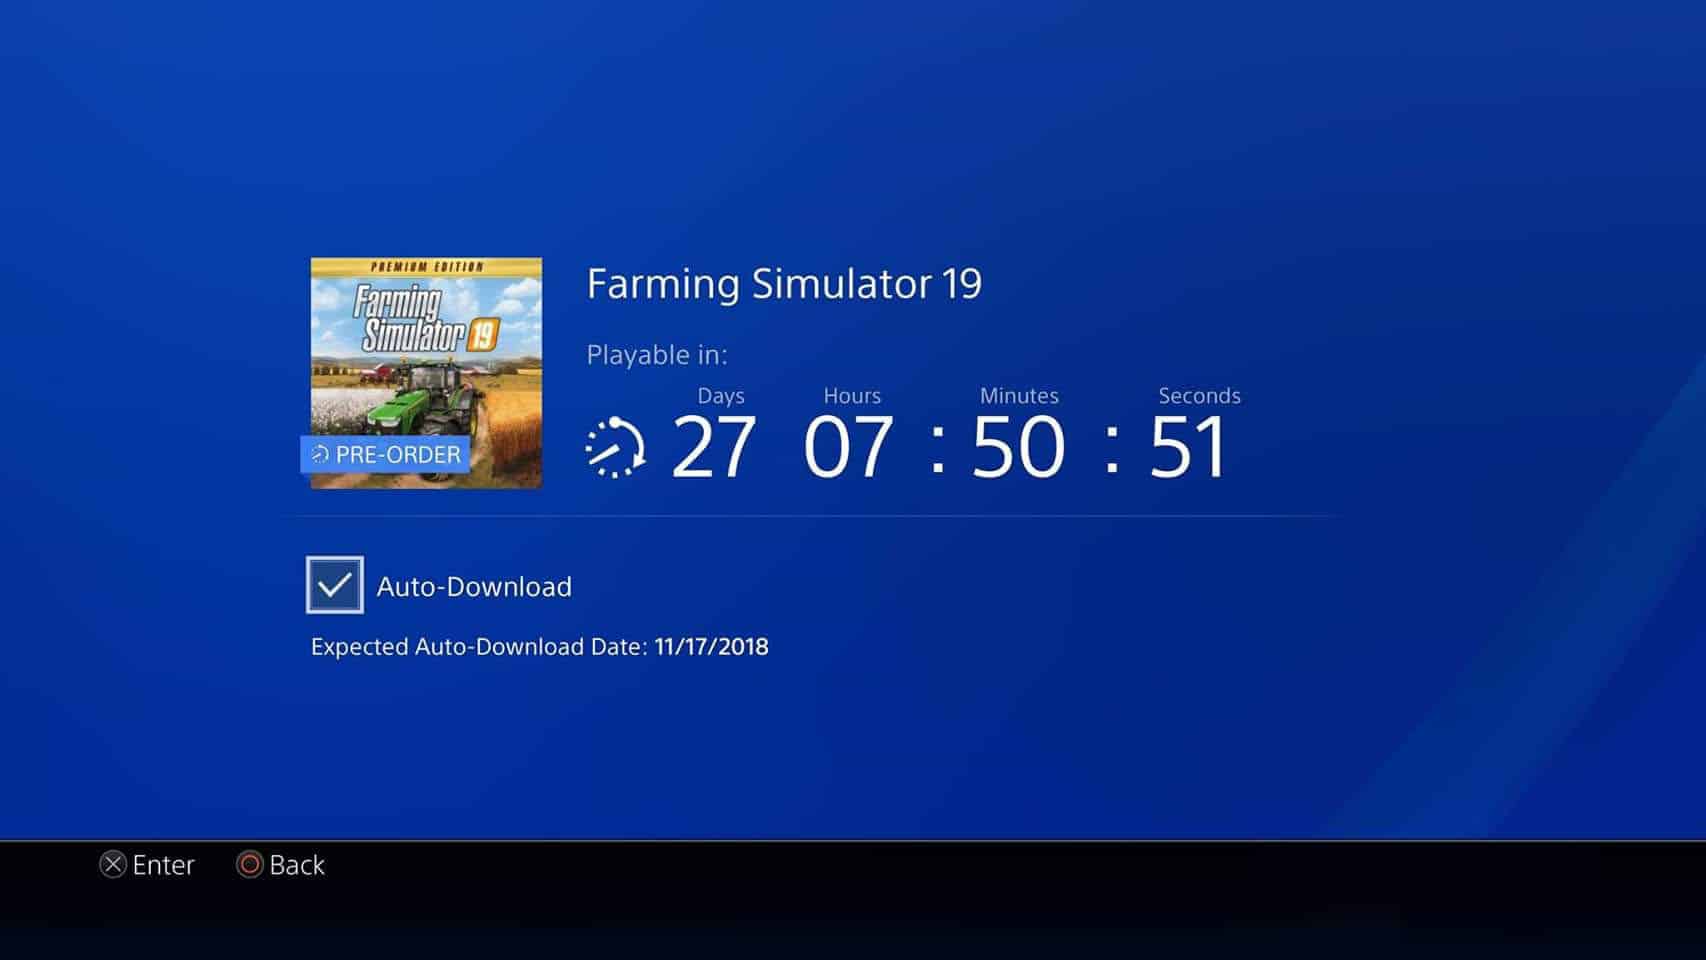 PS4, PlayStation will be the first ones to get Farming Simulator 19